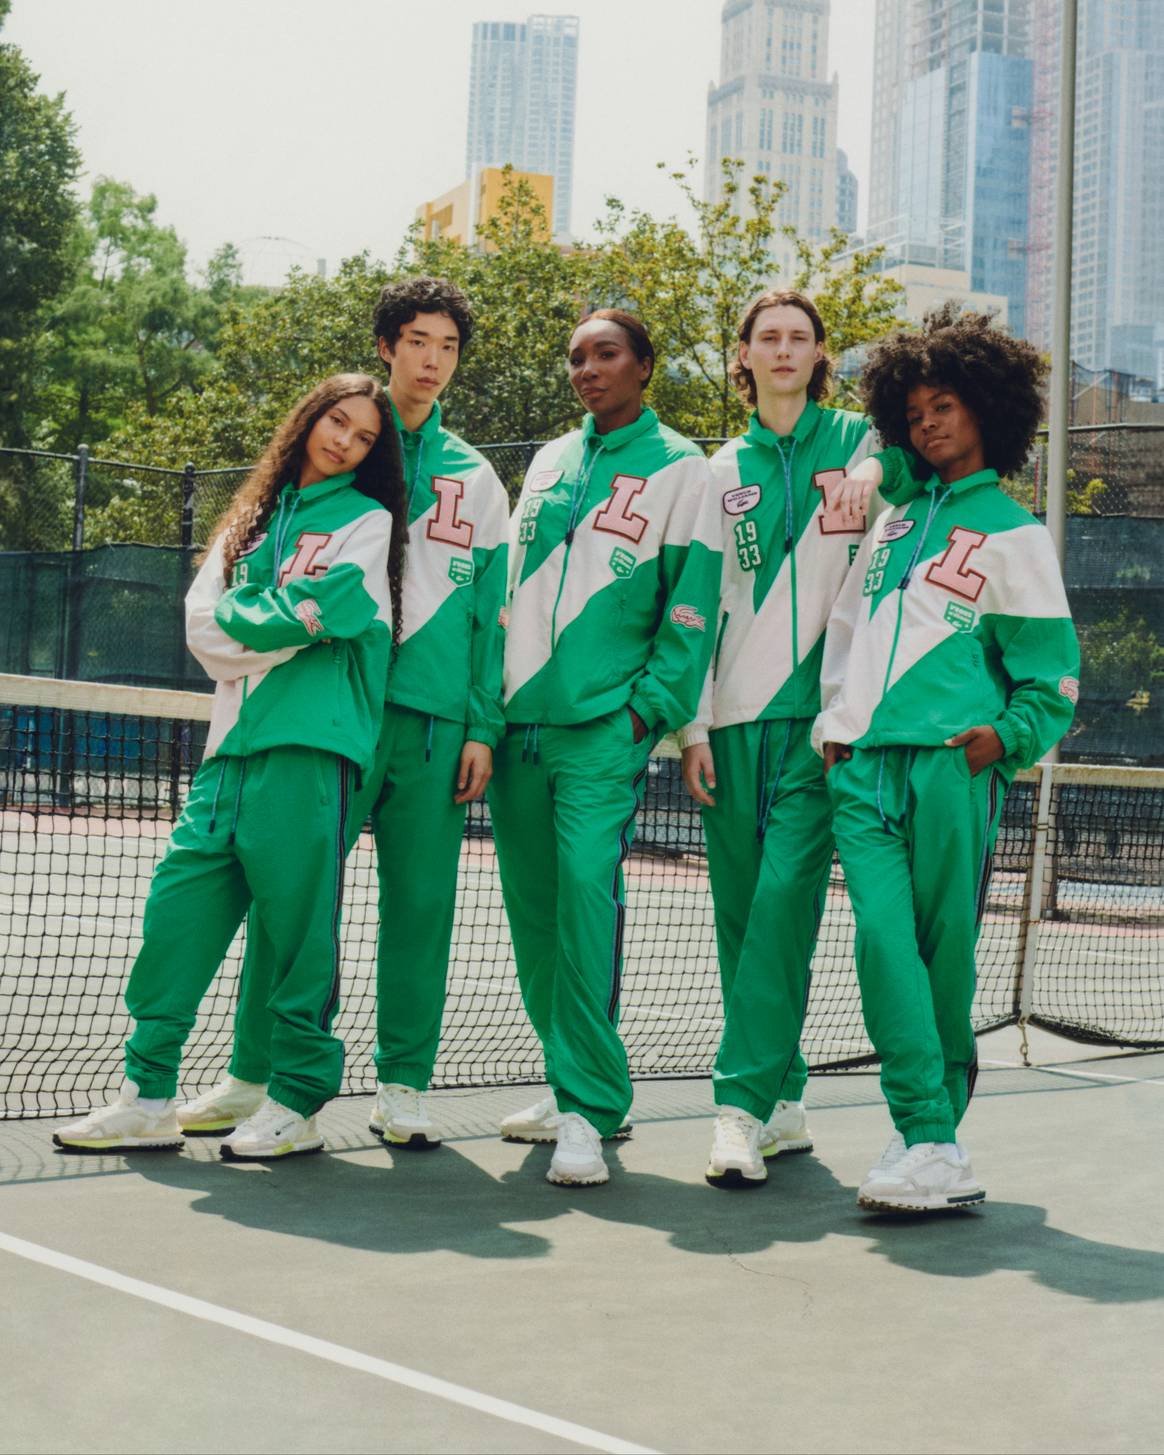 Lacoste x EleVen by Venus Williams collection